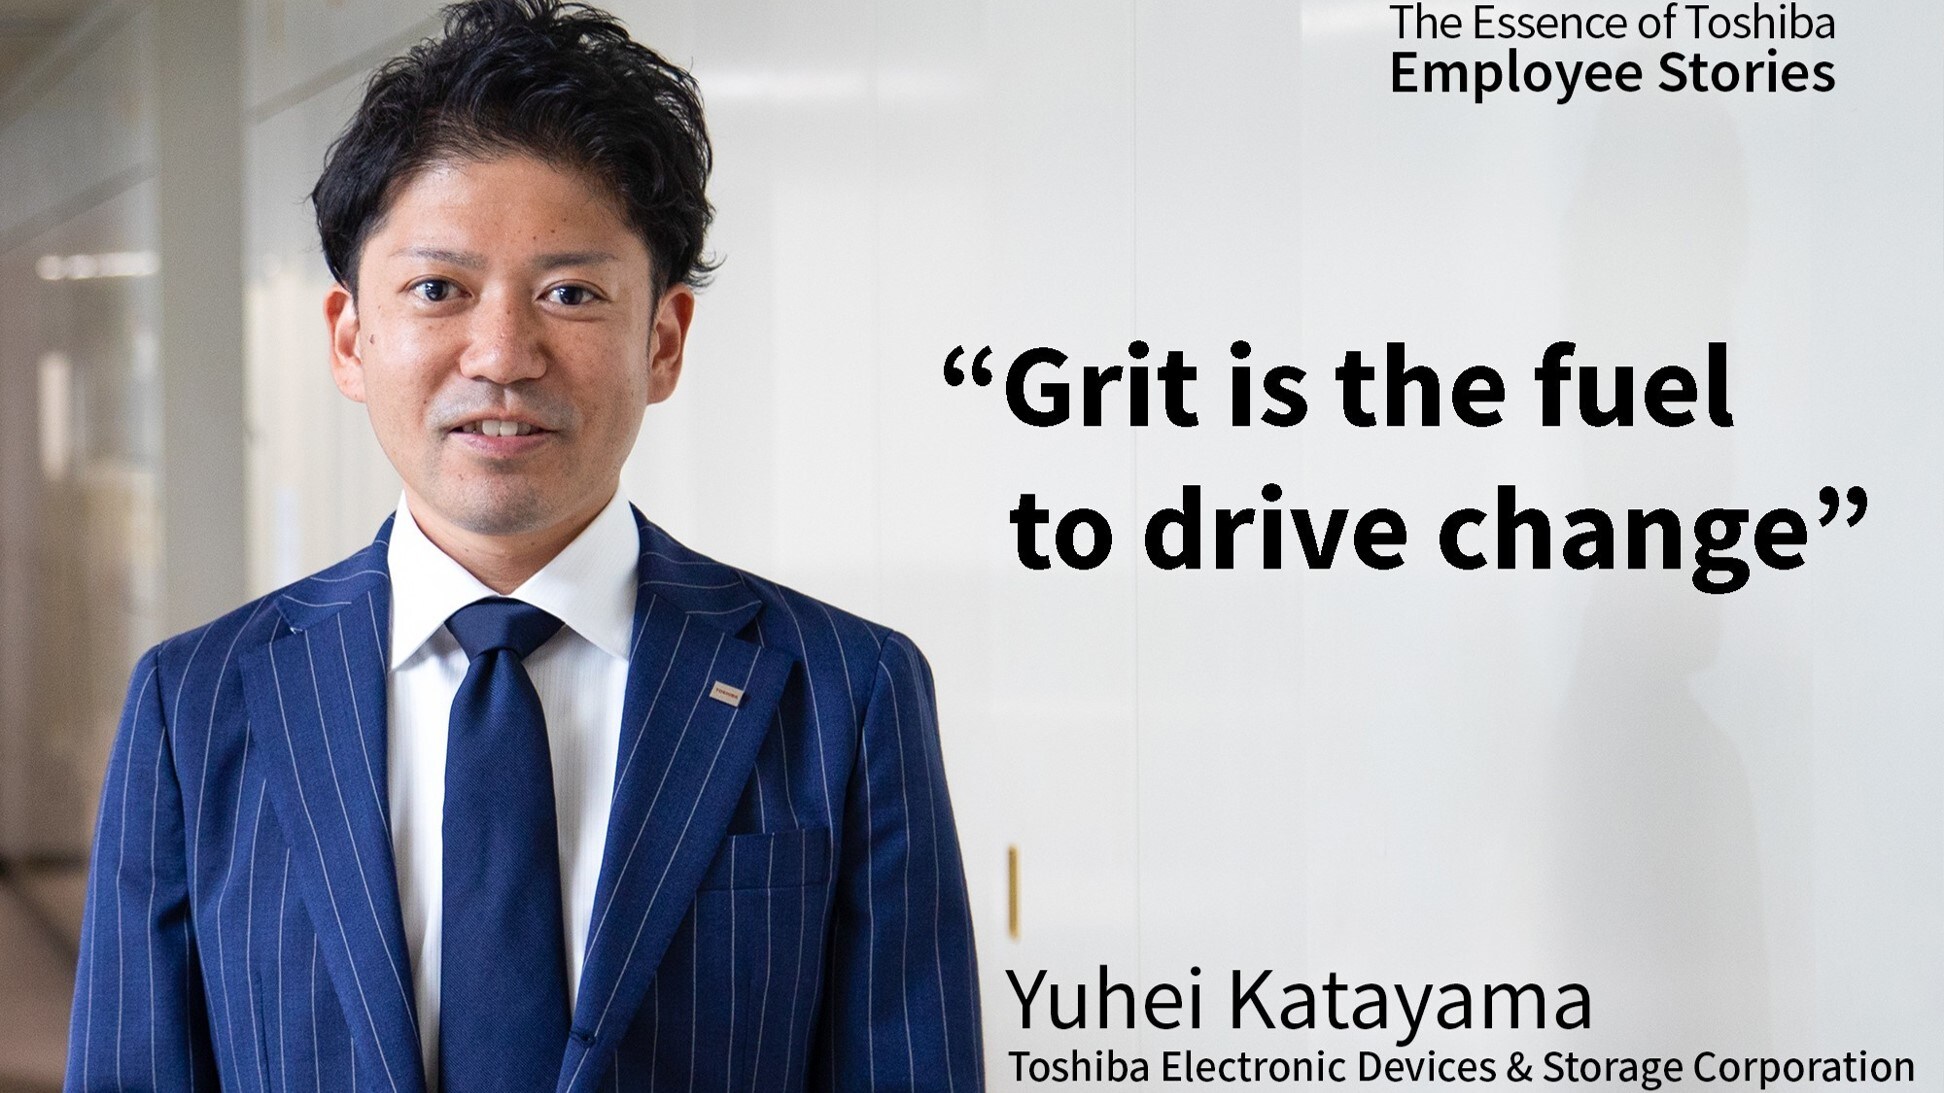 We Are Toshiba: Grit is the Fuel to Drive Change